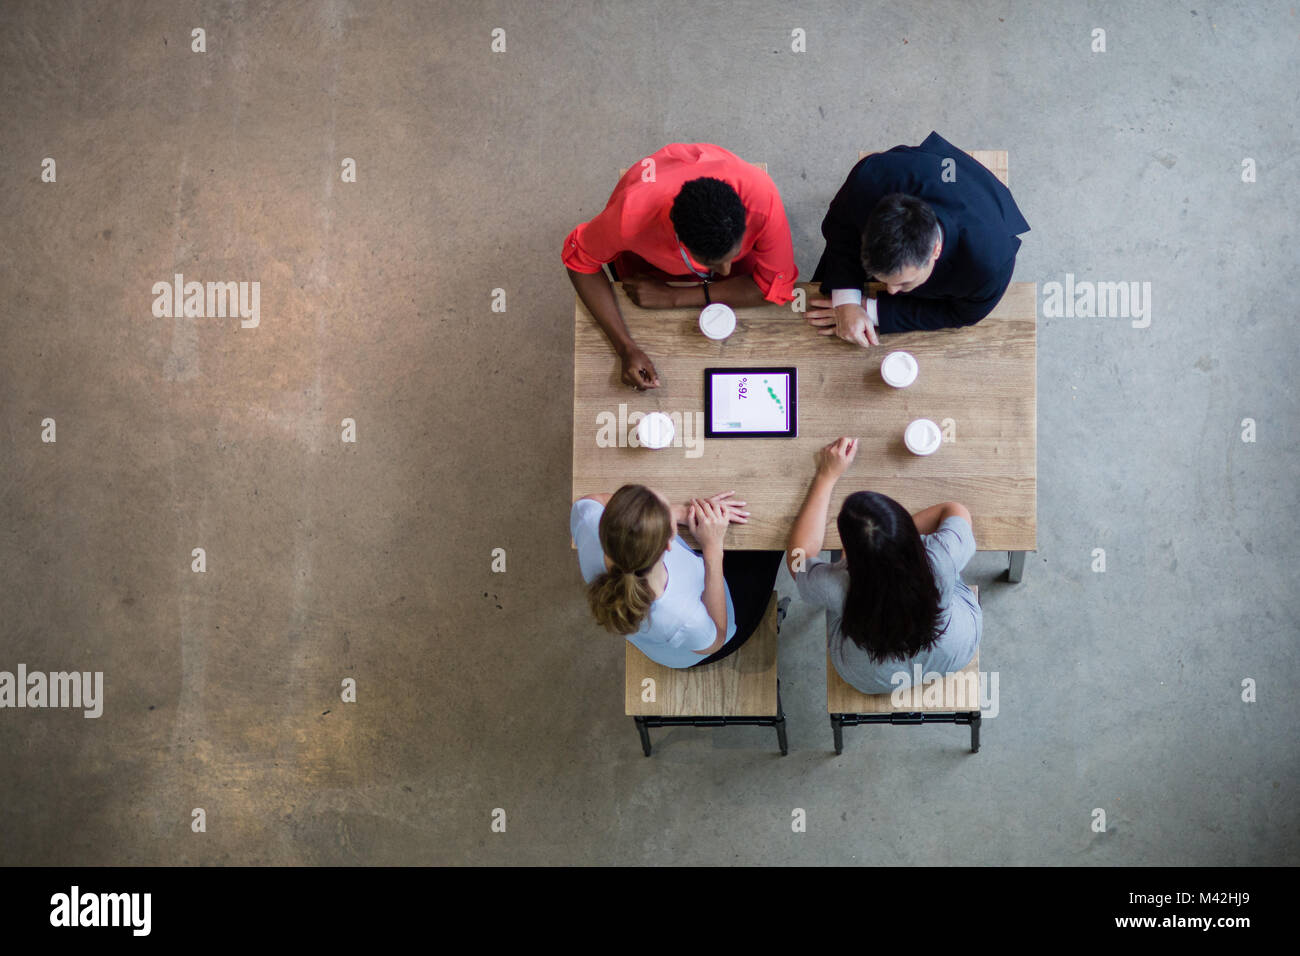 Overhead shot of a team using a digital tablet in a business meeting Stock Photo